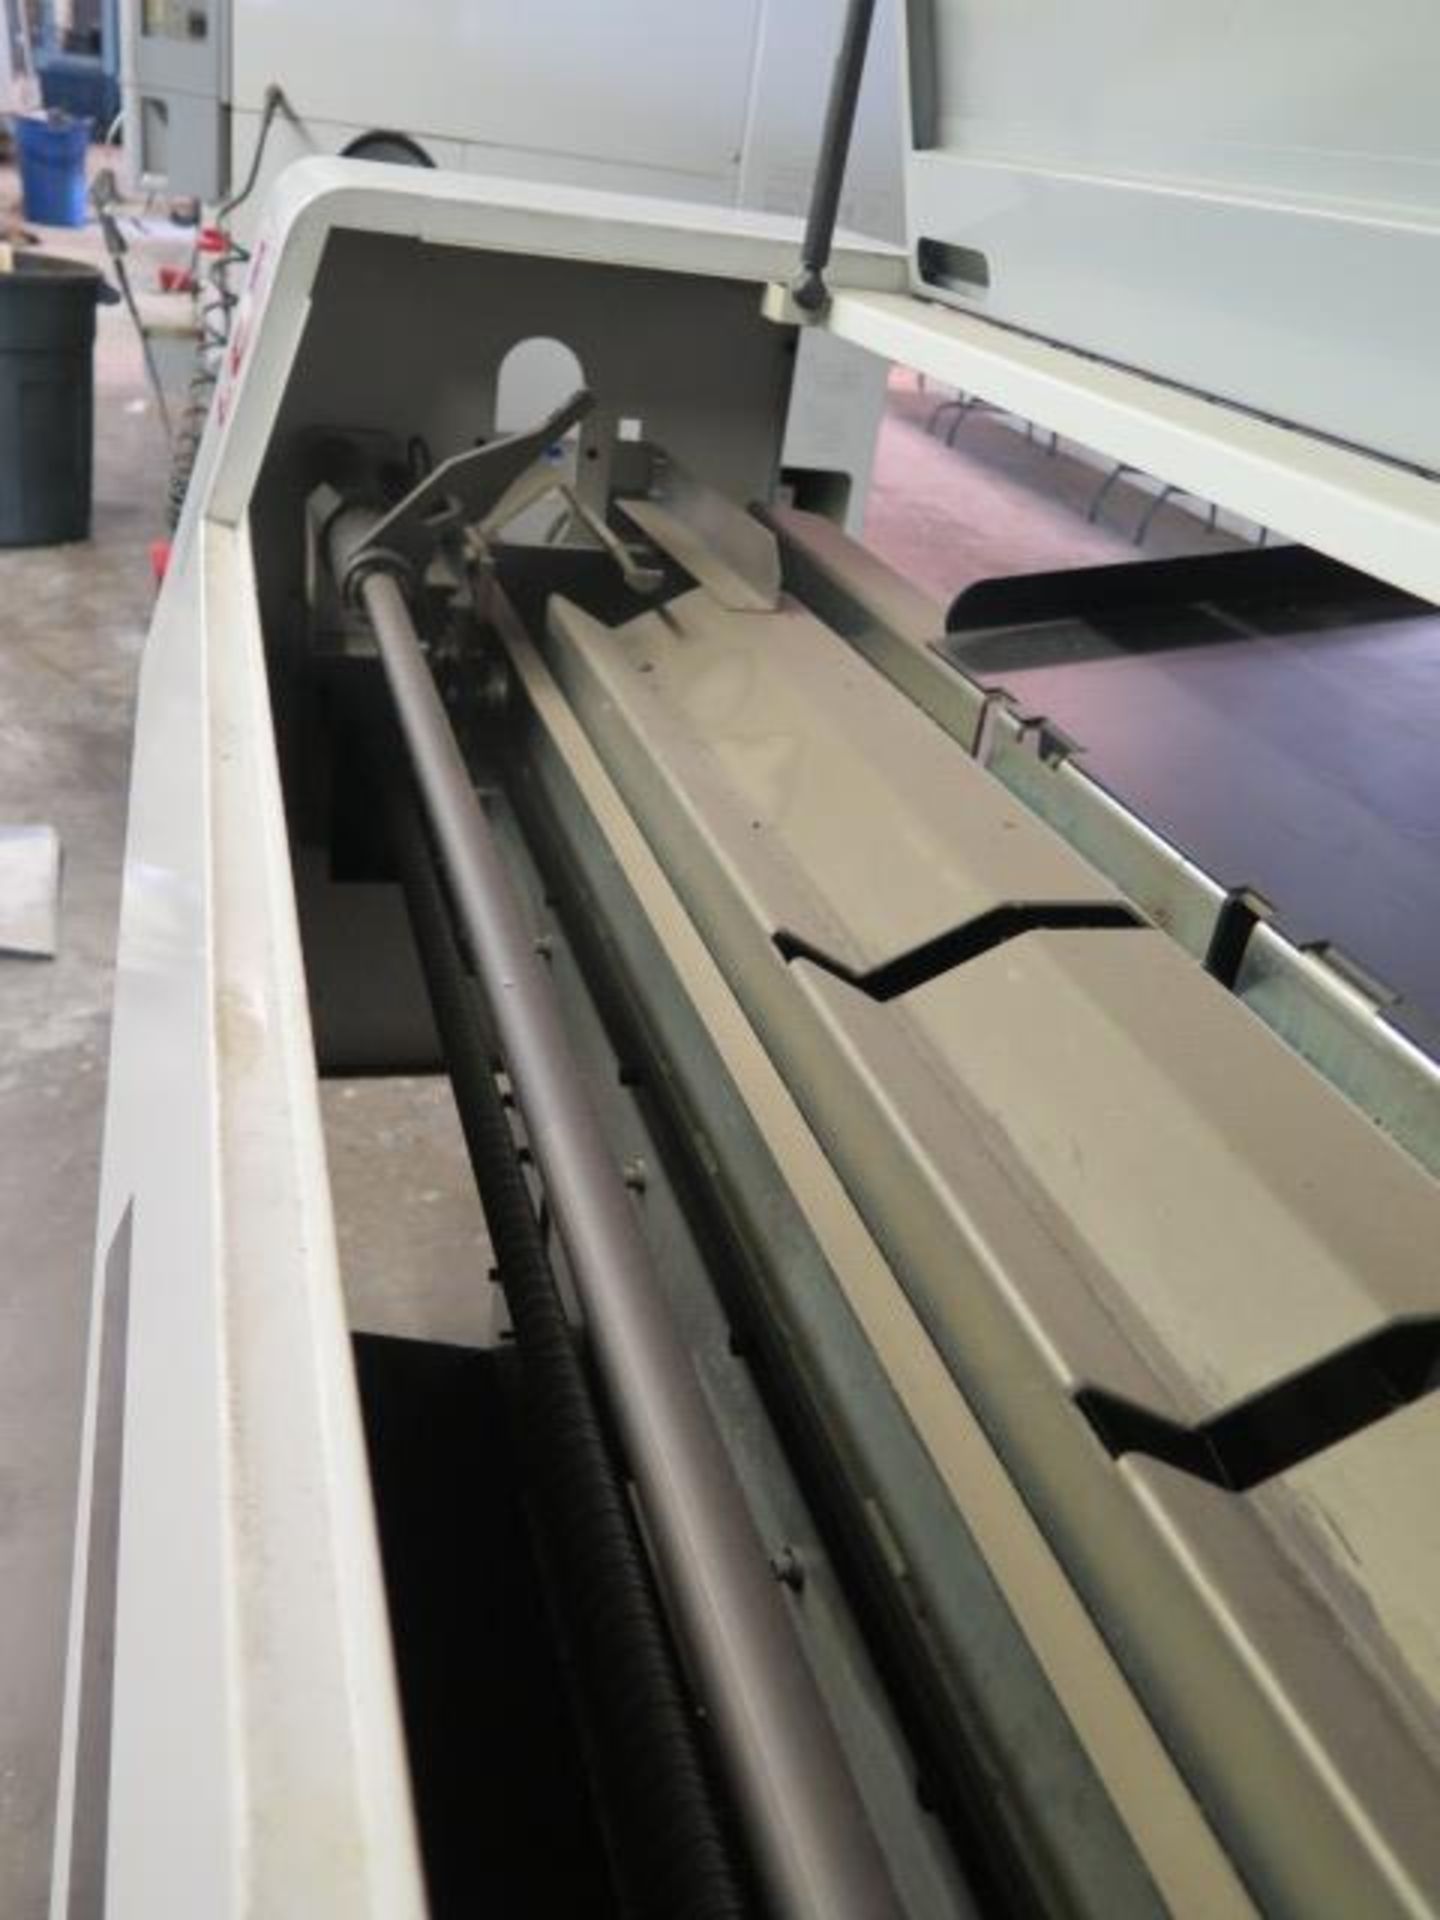 Haas Servobar 300 Automatic Bar Loader / Feeder s/n 91279 (SOLD AS-IS - NO WARRANTY) - Image 6 of 9